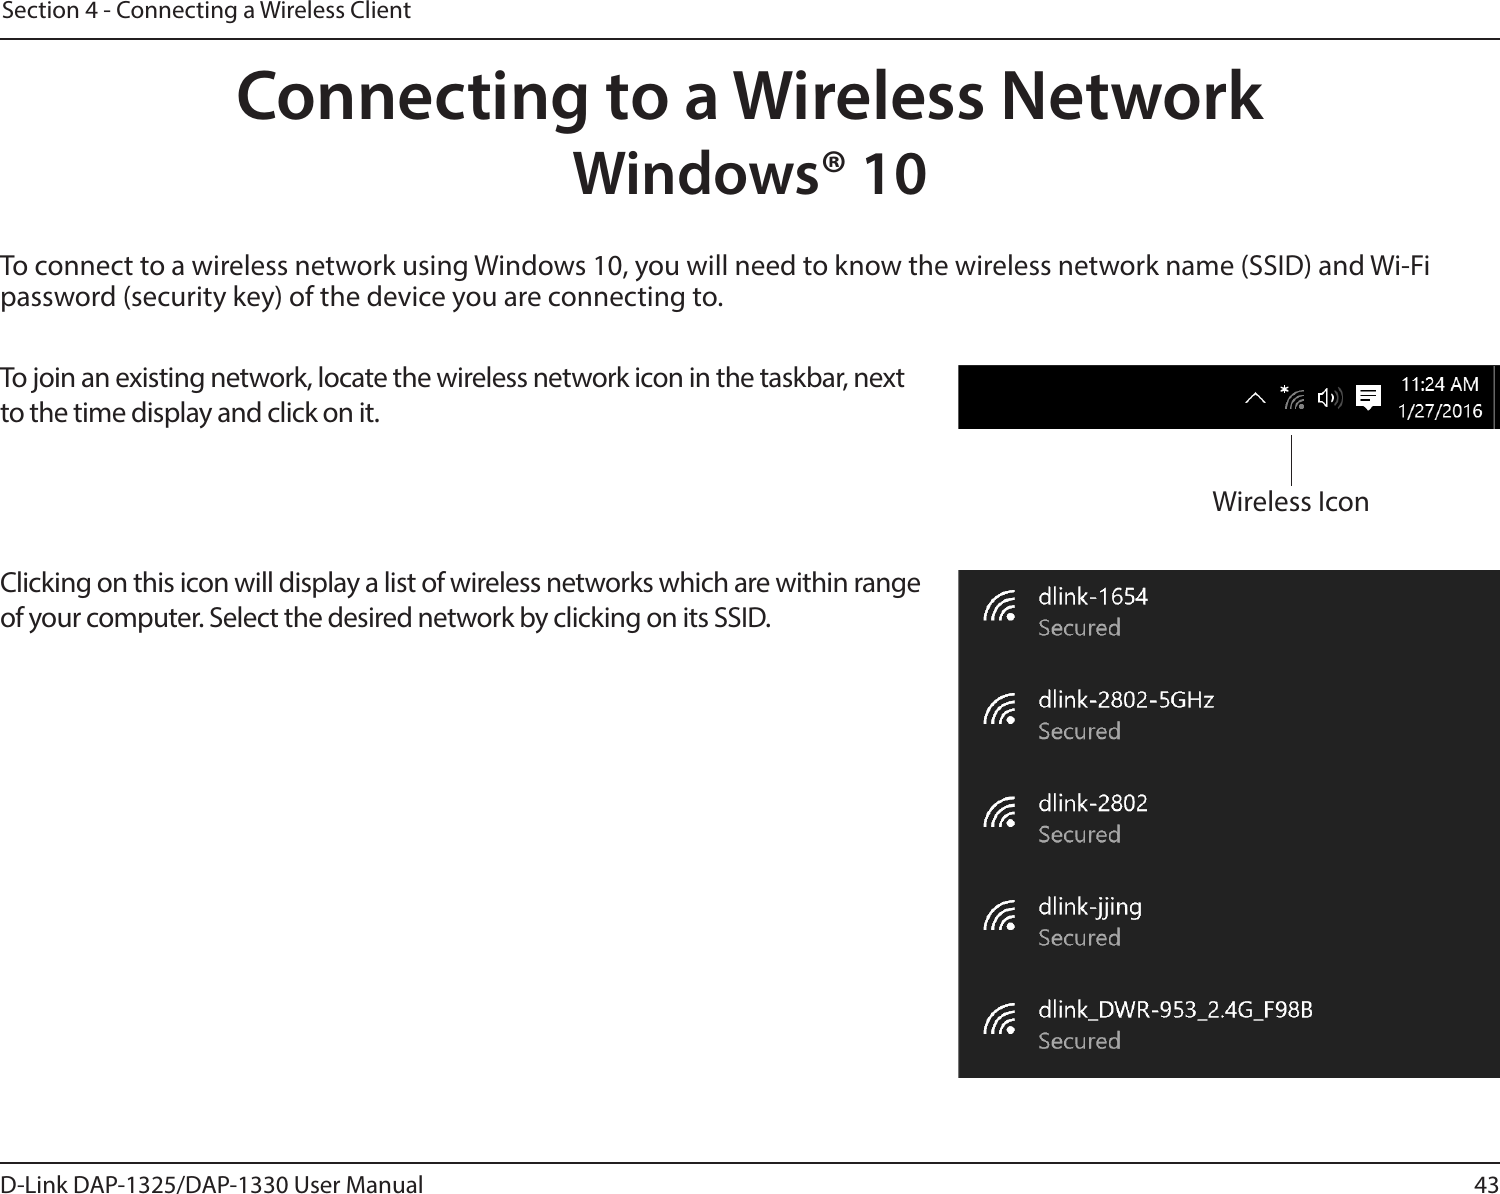 43D-Link DAP-1325/DAP-1330 User ManualSection 4 - Connecting a Wireless ClientTo connect to a wireless network using Windows 10, you will need to know the wireless network name (SSID) and Wi-Fi password (security key) of the device you are connecting to. To join an existing network, locate the wireless network icon in the taskbar, next to the time display and click on it. Wireless IconClicking on this icon will display a list of wireless networks which are within range of your computer. Select the desired network by clicking on its SSID.Connecting to a Wireless NetworkWindows® 10